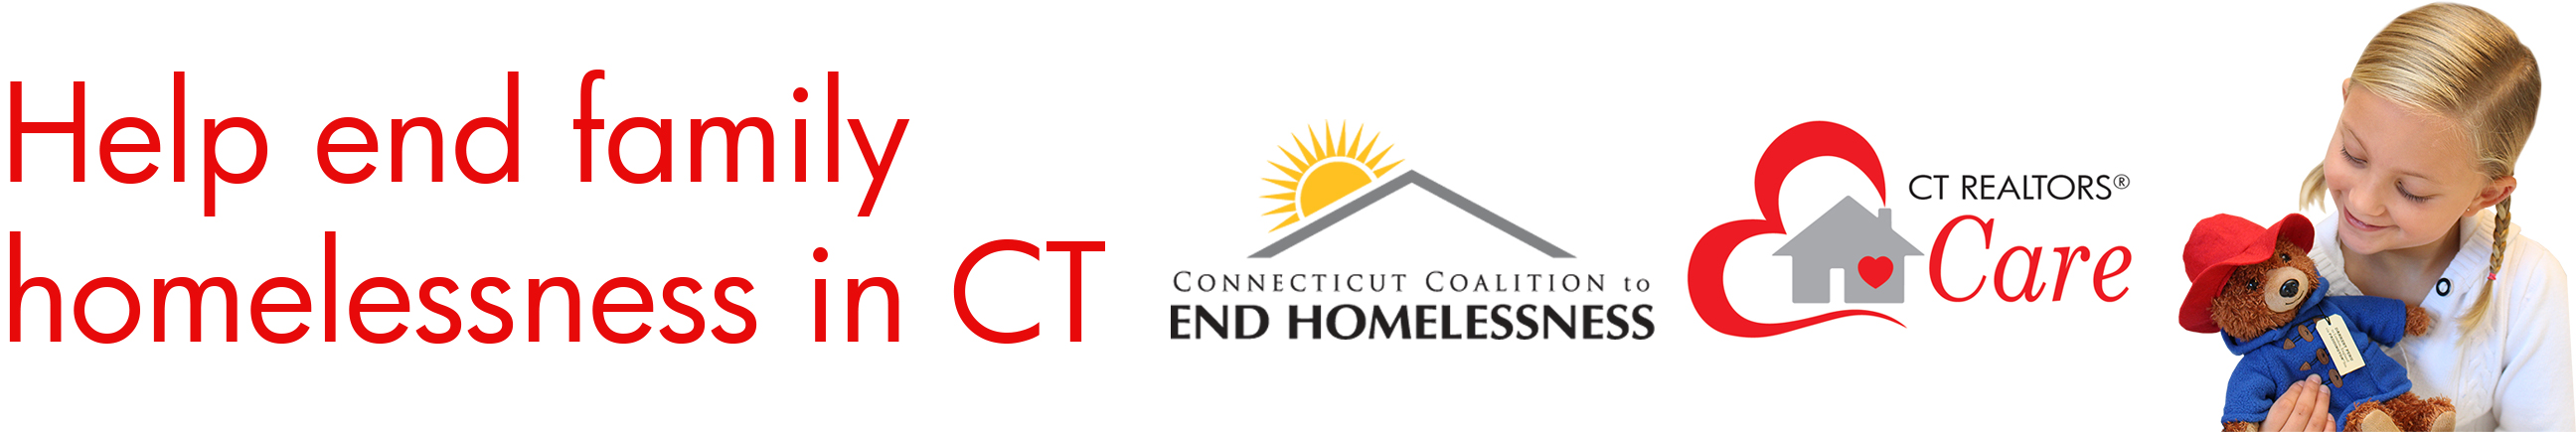 Help end family homelessness in Connecticut